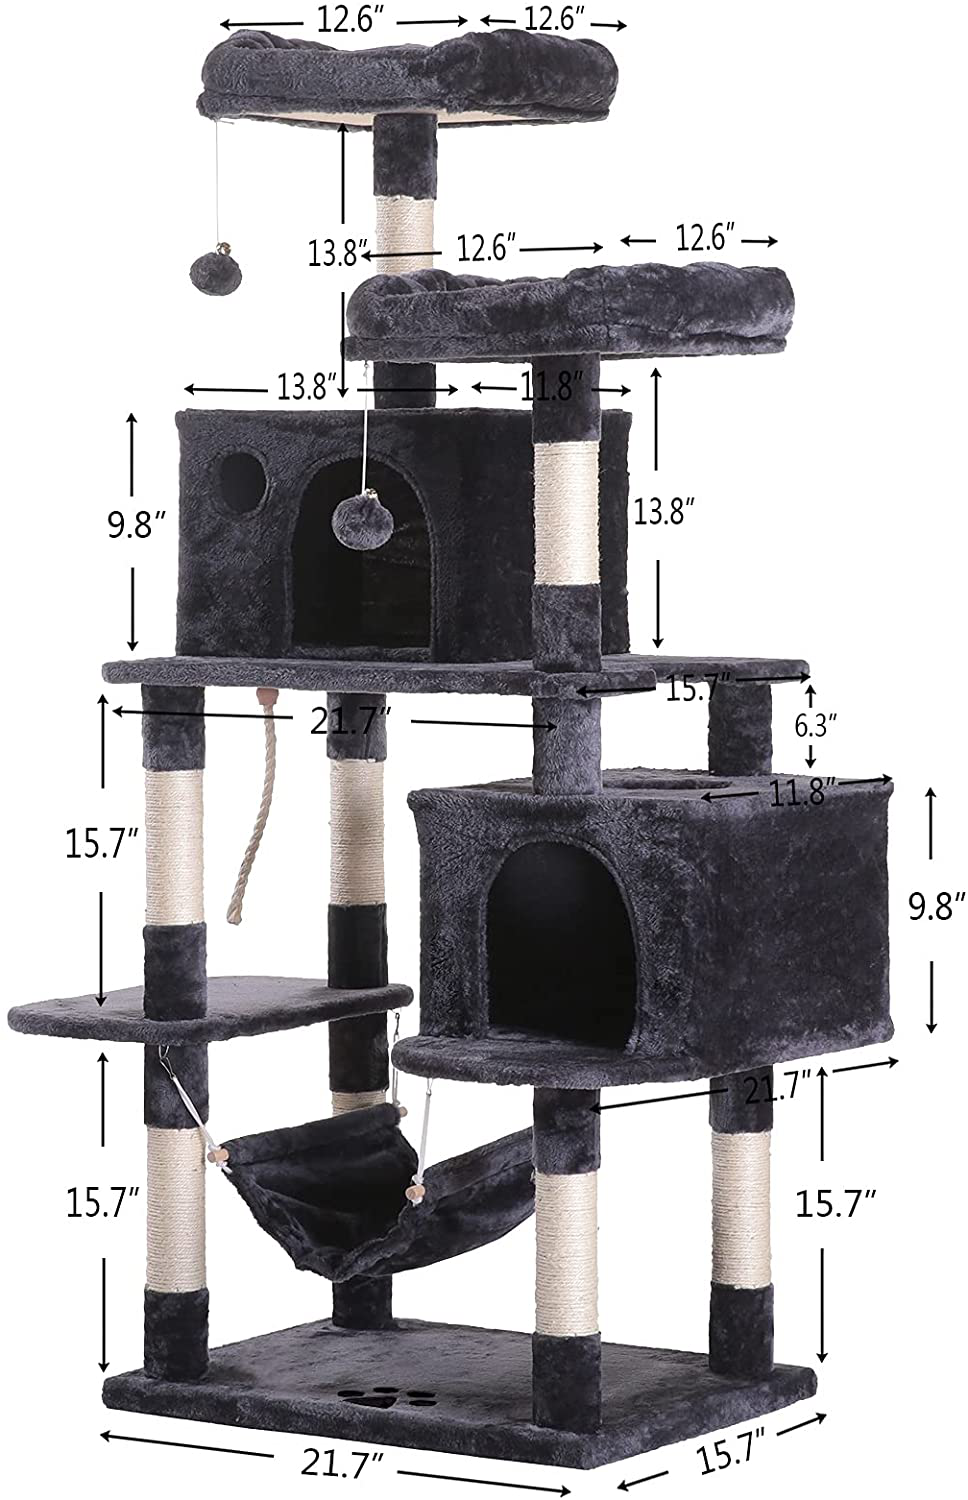 Hey-Bro Extra Large Multi-Level Cat Tree Condo Furniture with Sisal-Covered Scratching Posts, 2 Bigger Plush Condos, Perch Hammock for Kittens, Cats and Pets